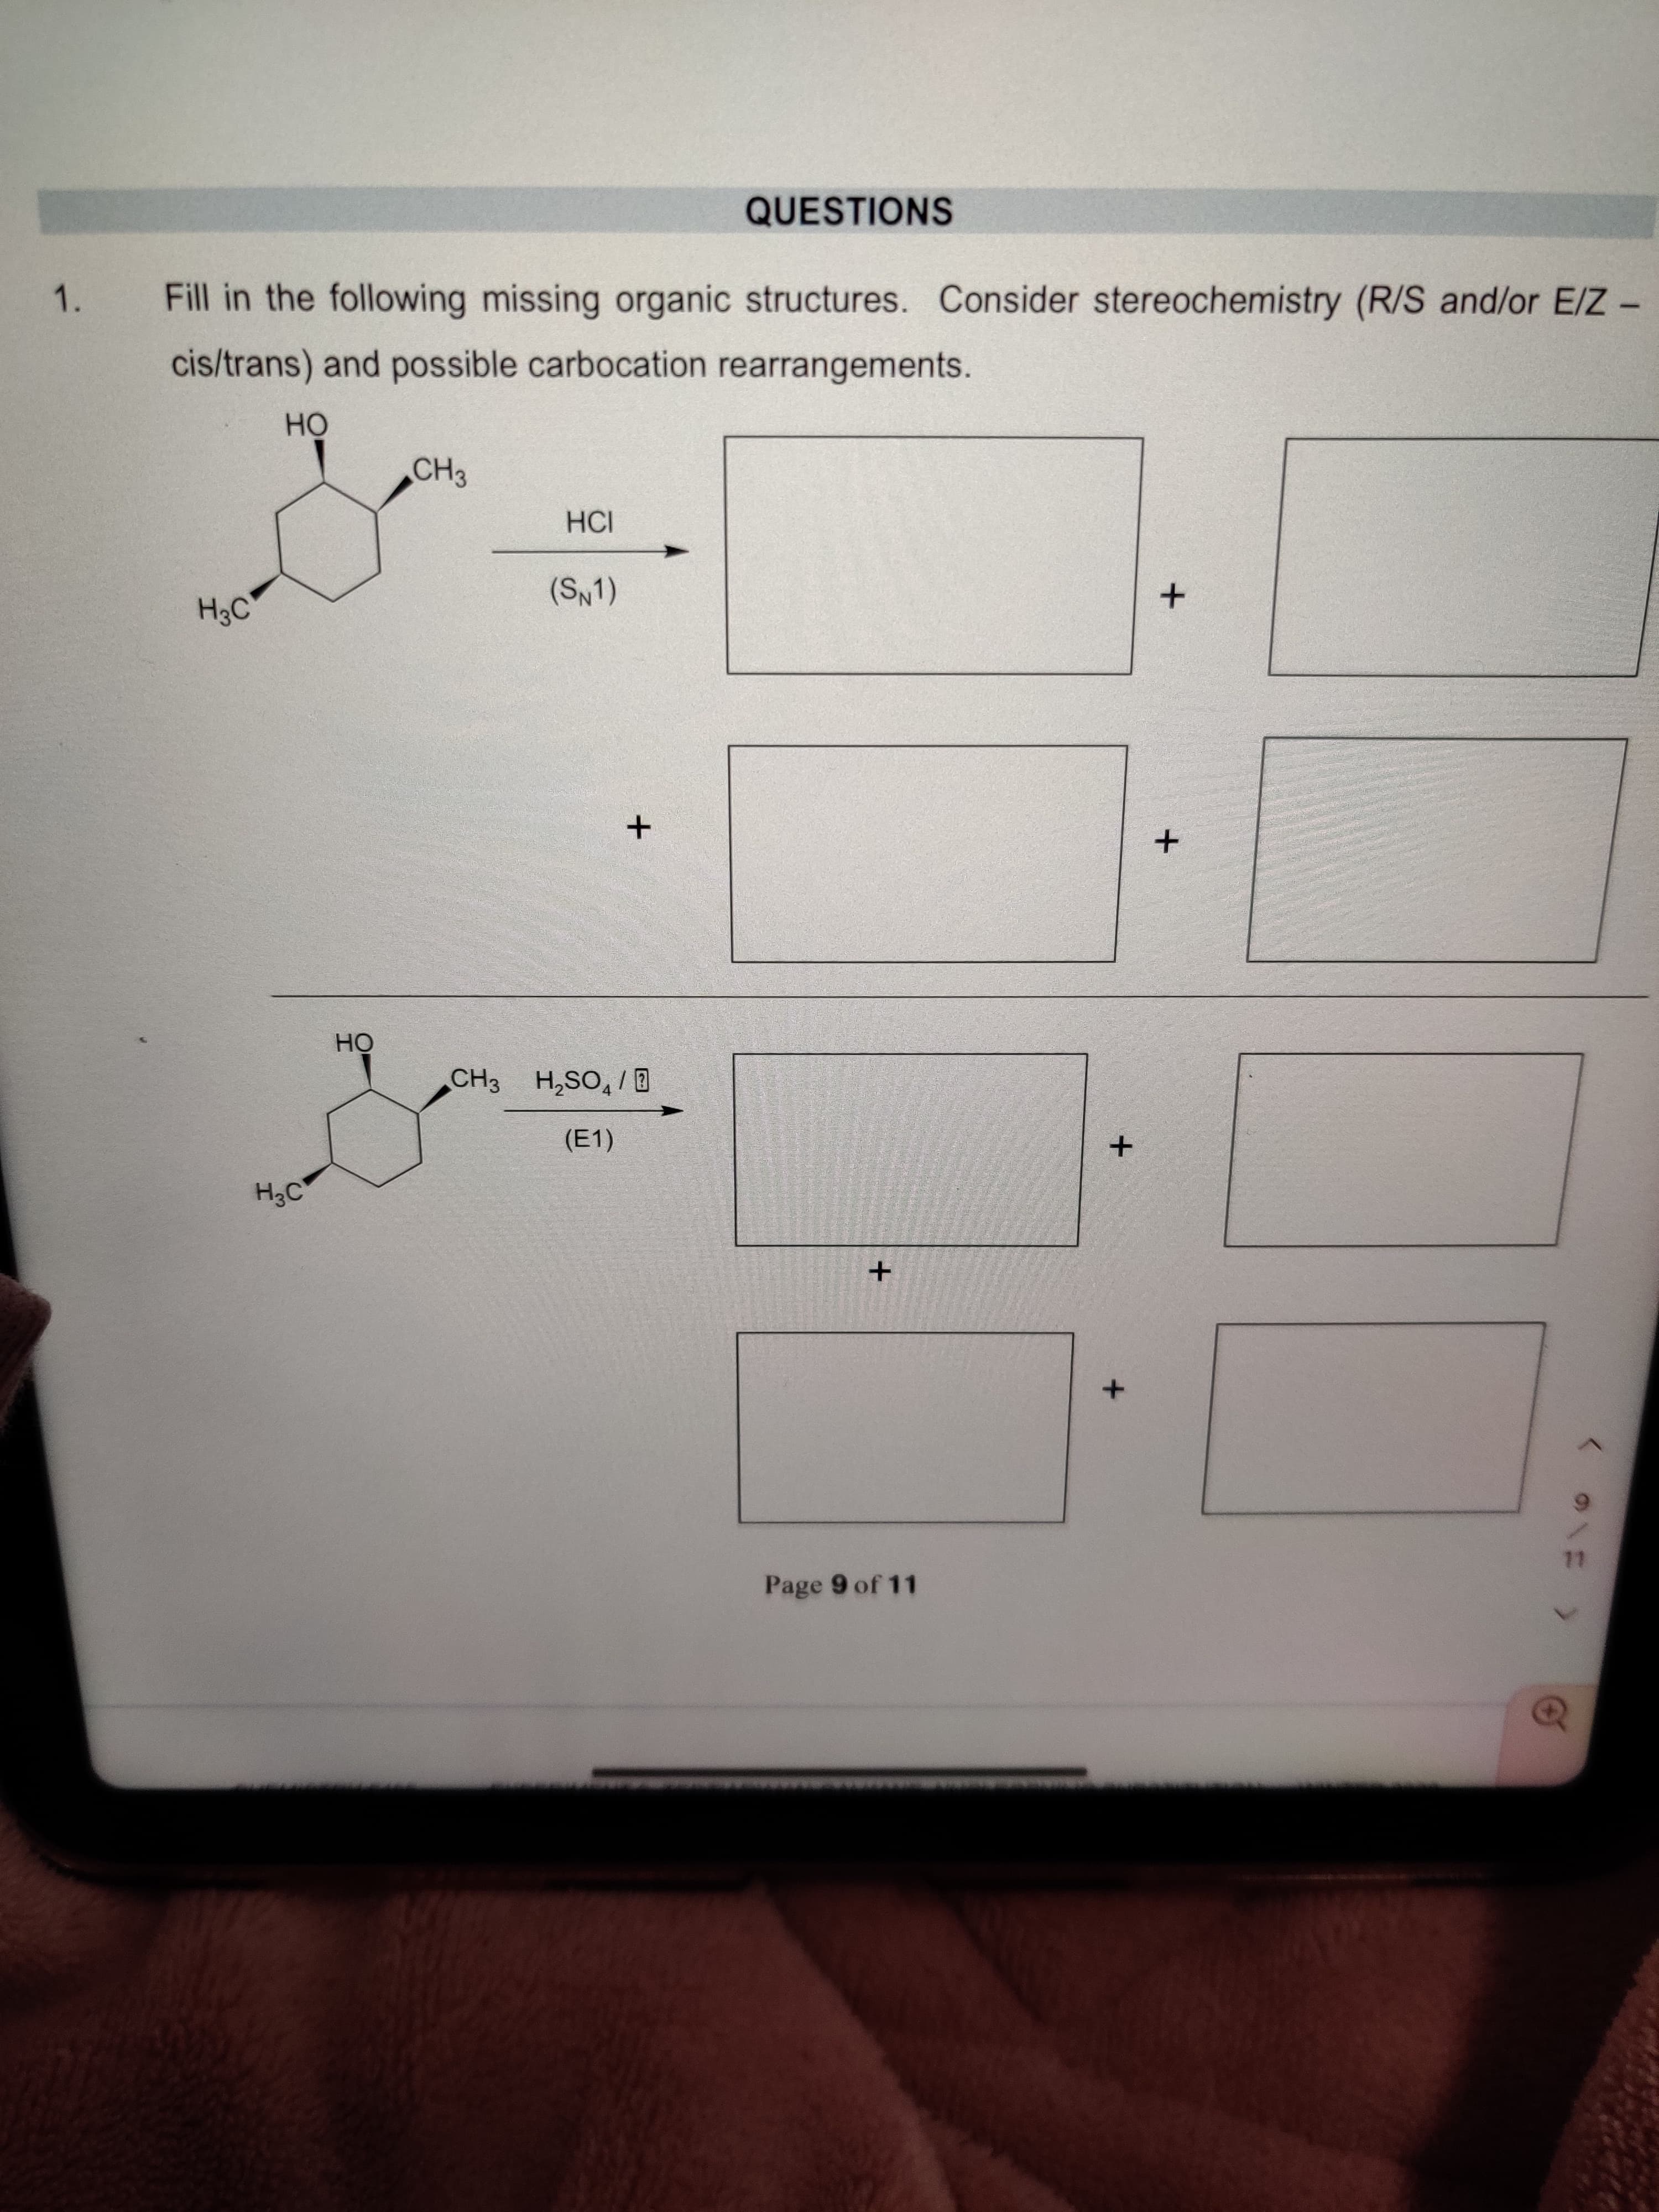 QUESTIONS
1. Fill in the following missing organic structures. Consider stereochemistry (R/S and/or E/Z -
cis/trans) and possible carbocation rearrangements.
OH
HCI
H3C
(SN1)
OH
0/'os'H H
(E1)
Page 9 of 11
